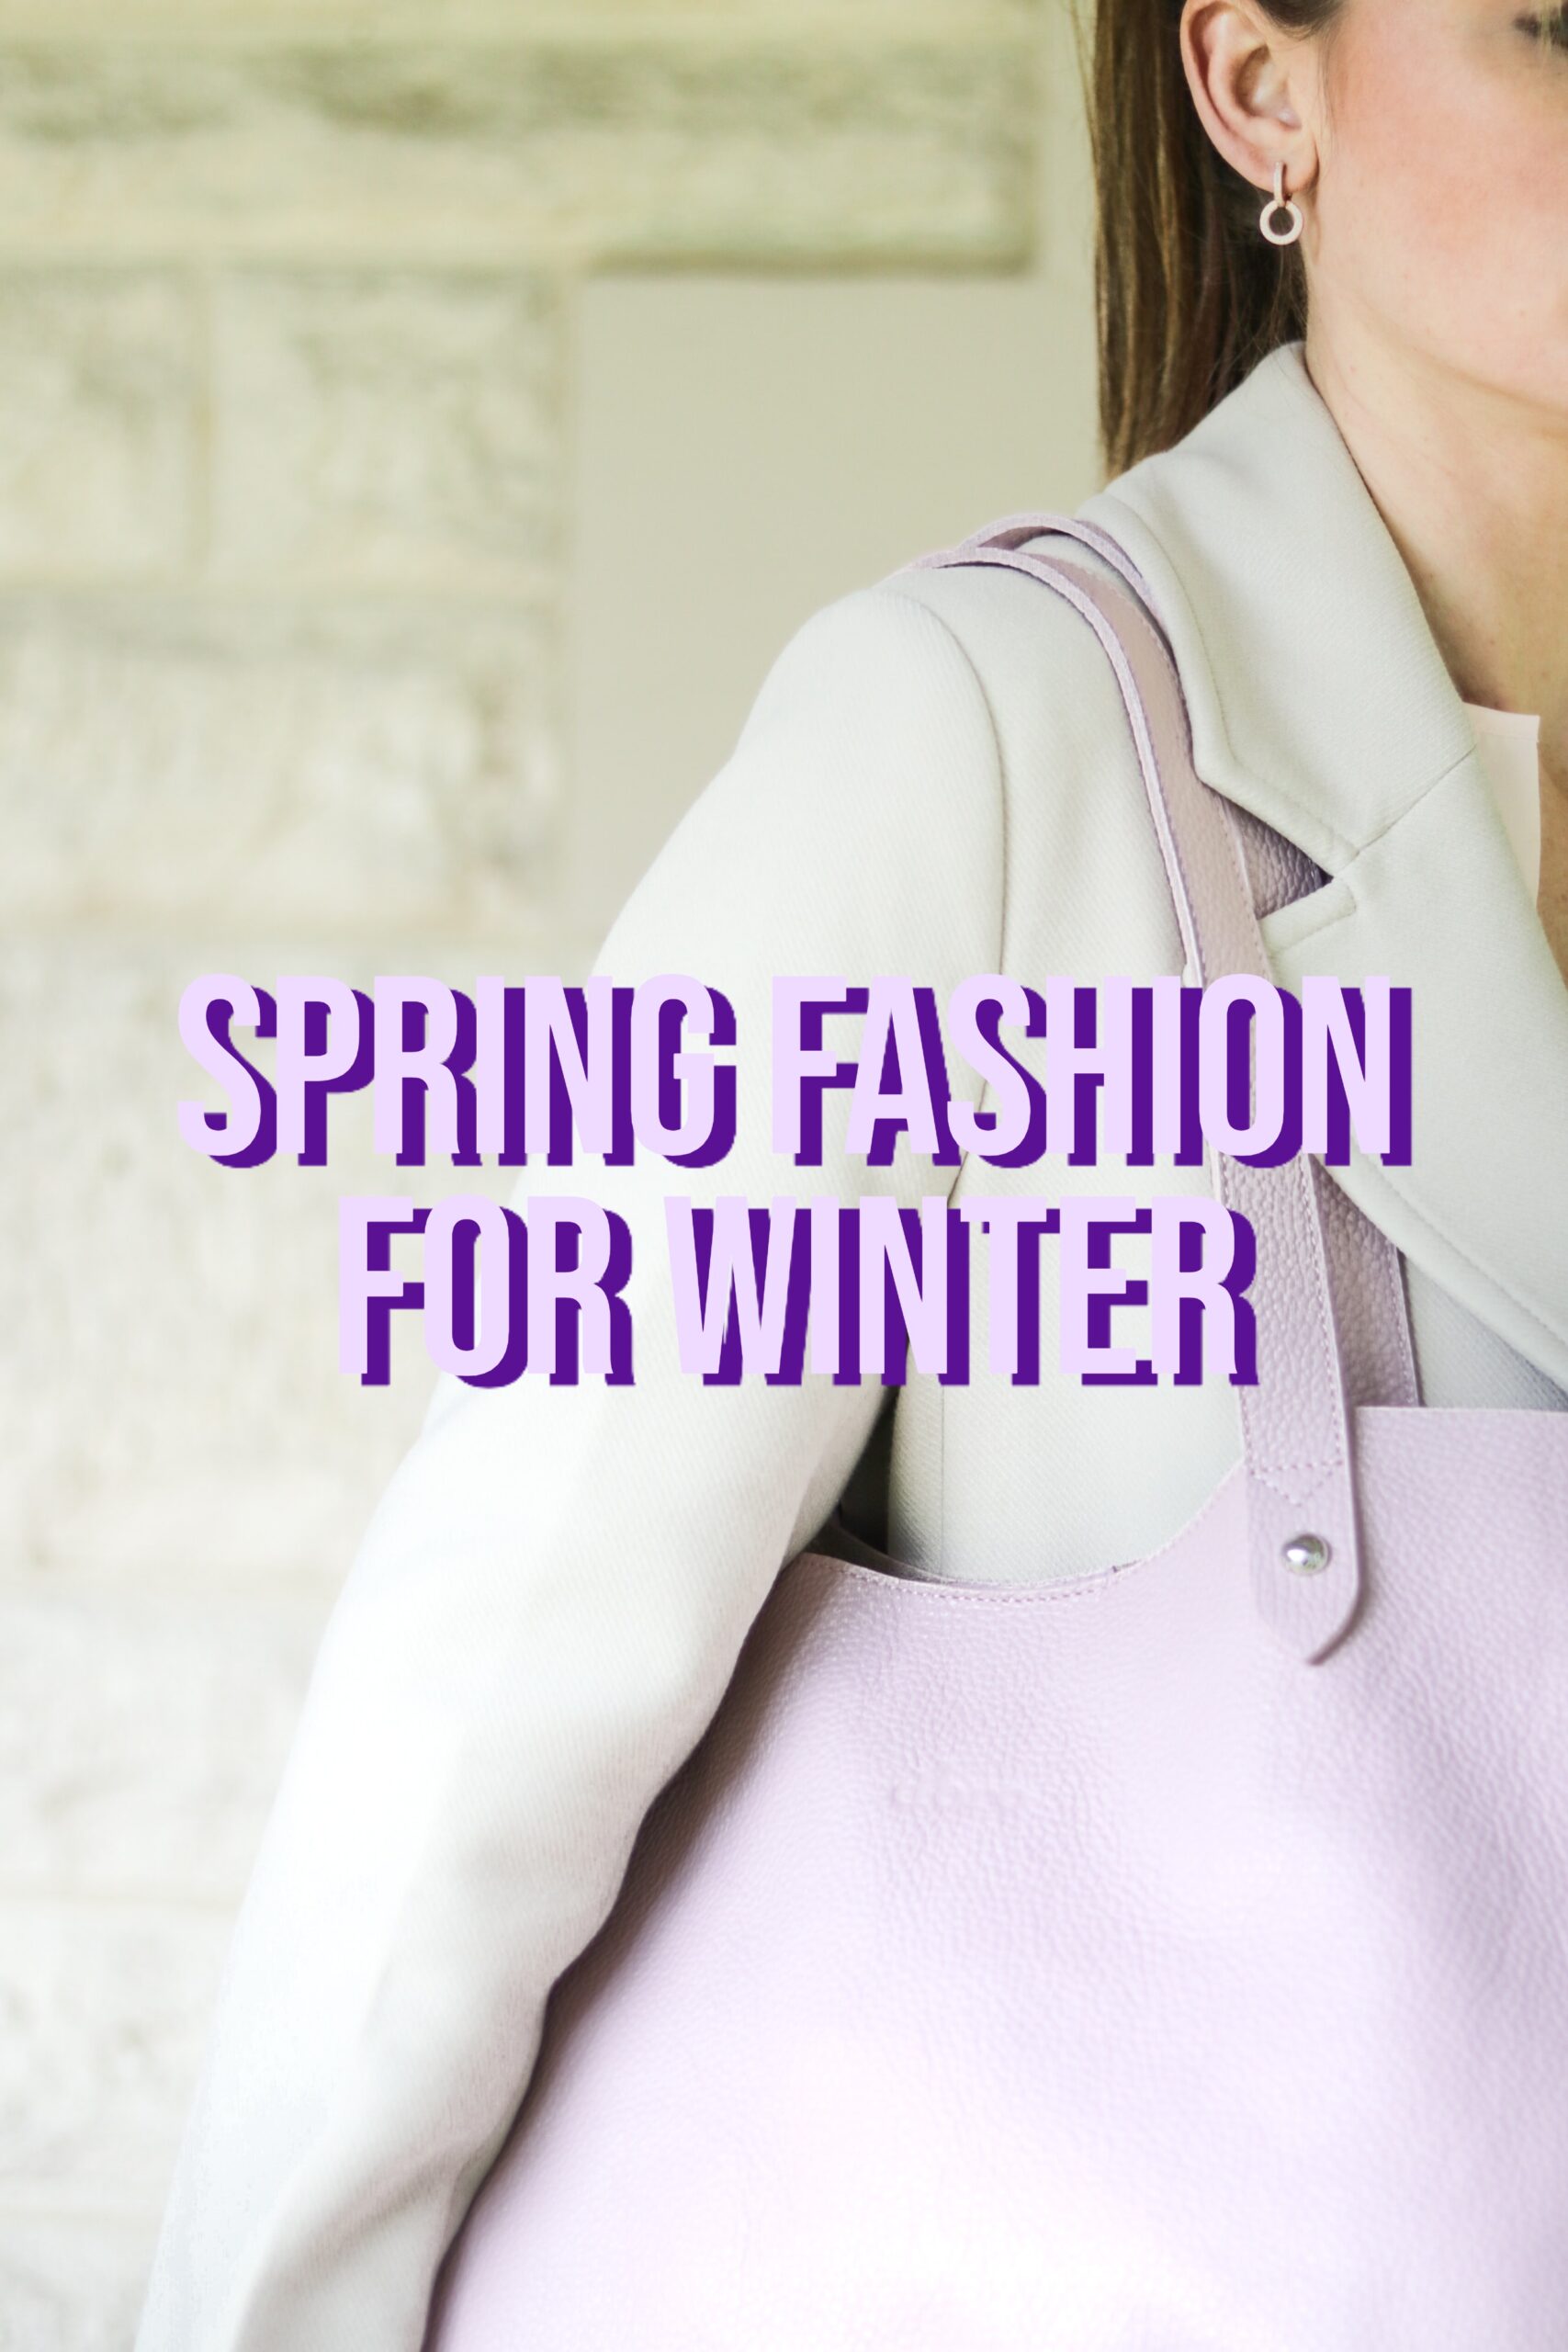 How To Embrace Spring Fashion For Winter - The Fashion Folks